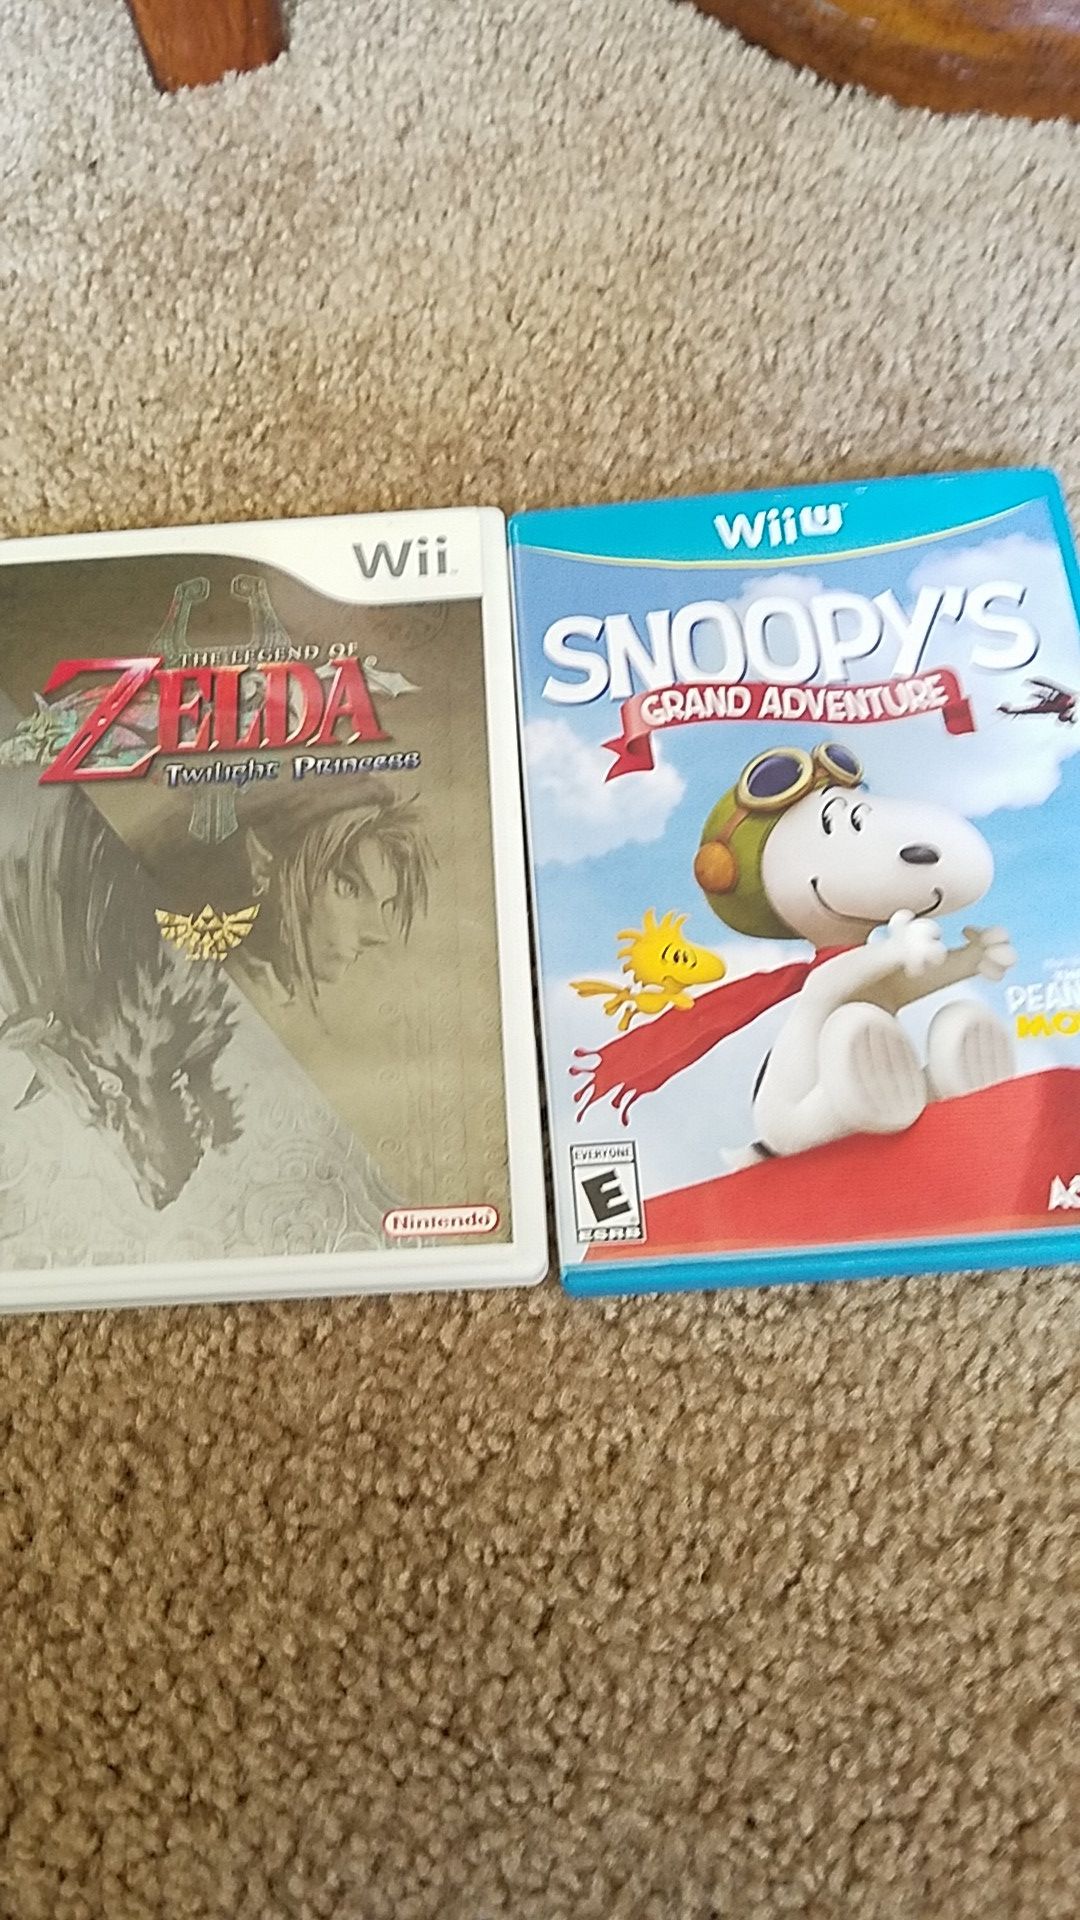 Wii and Wii u games